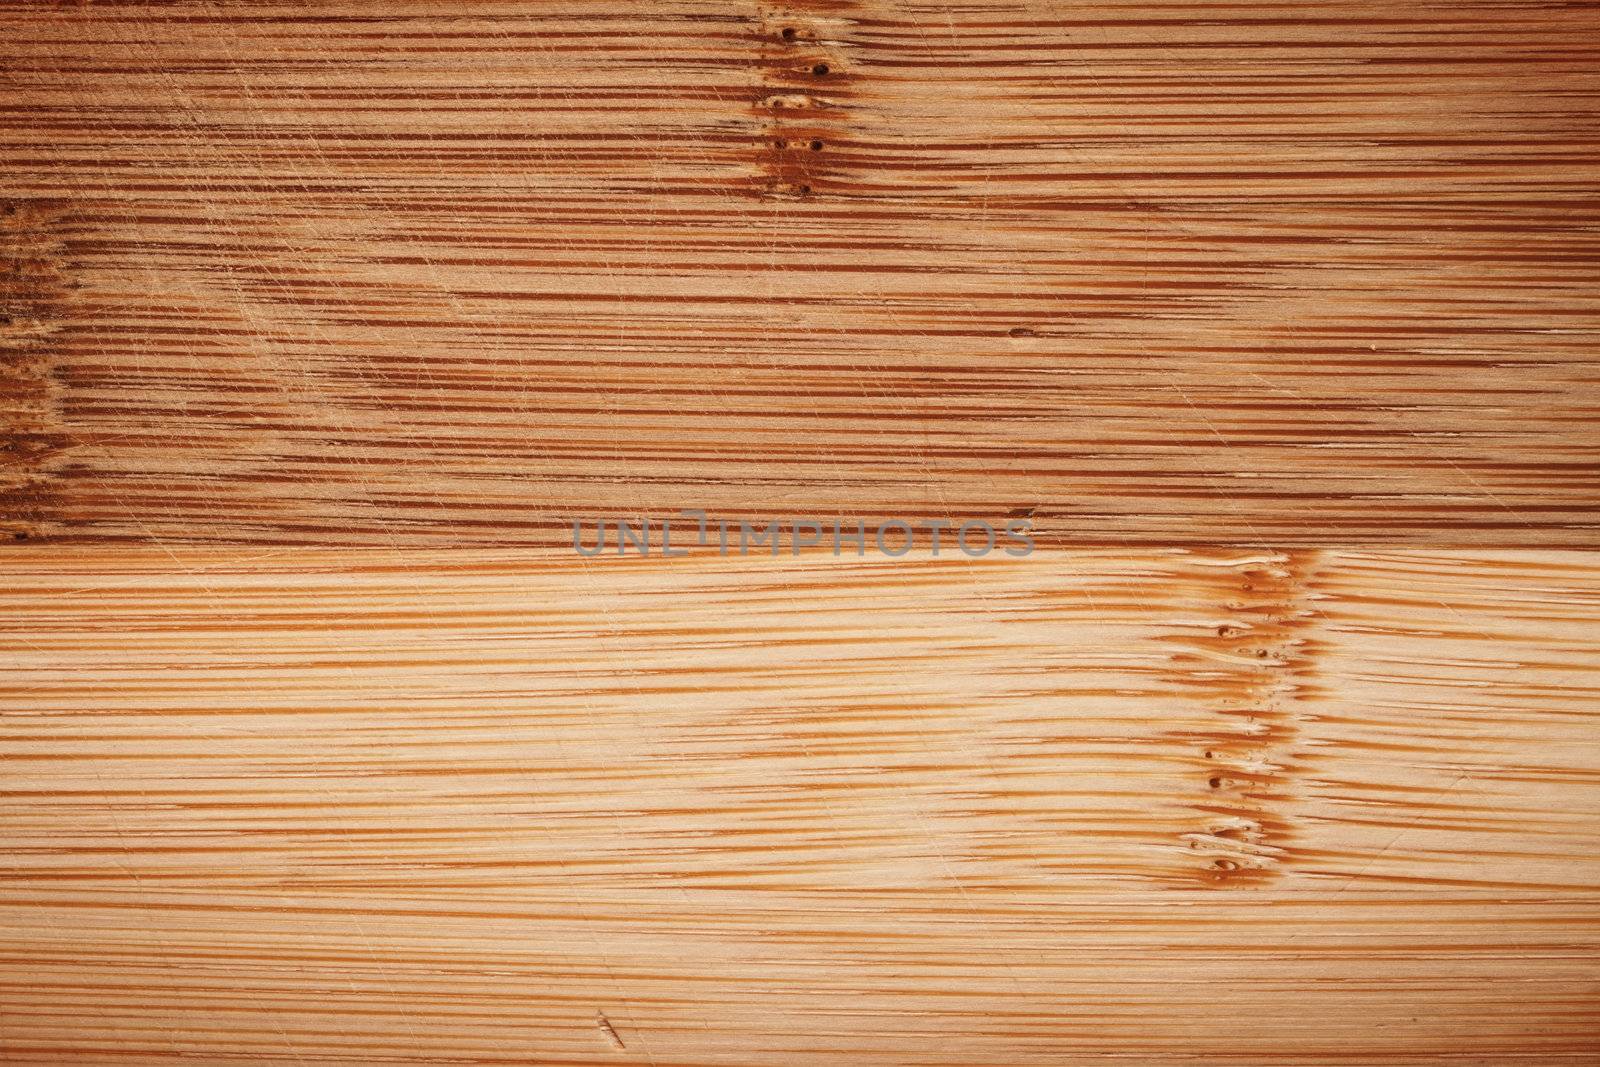 Pressed bamboo texture for background. Close up